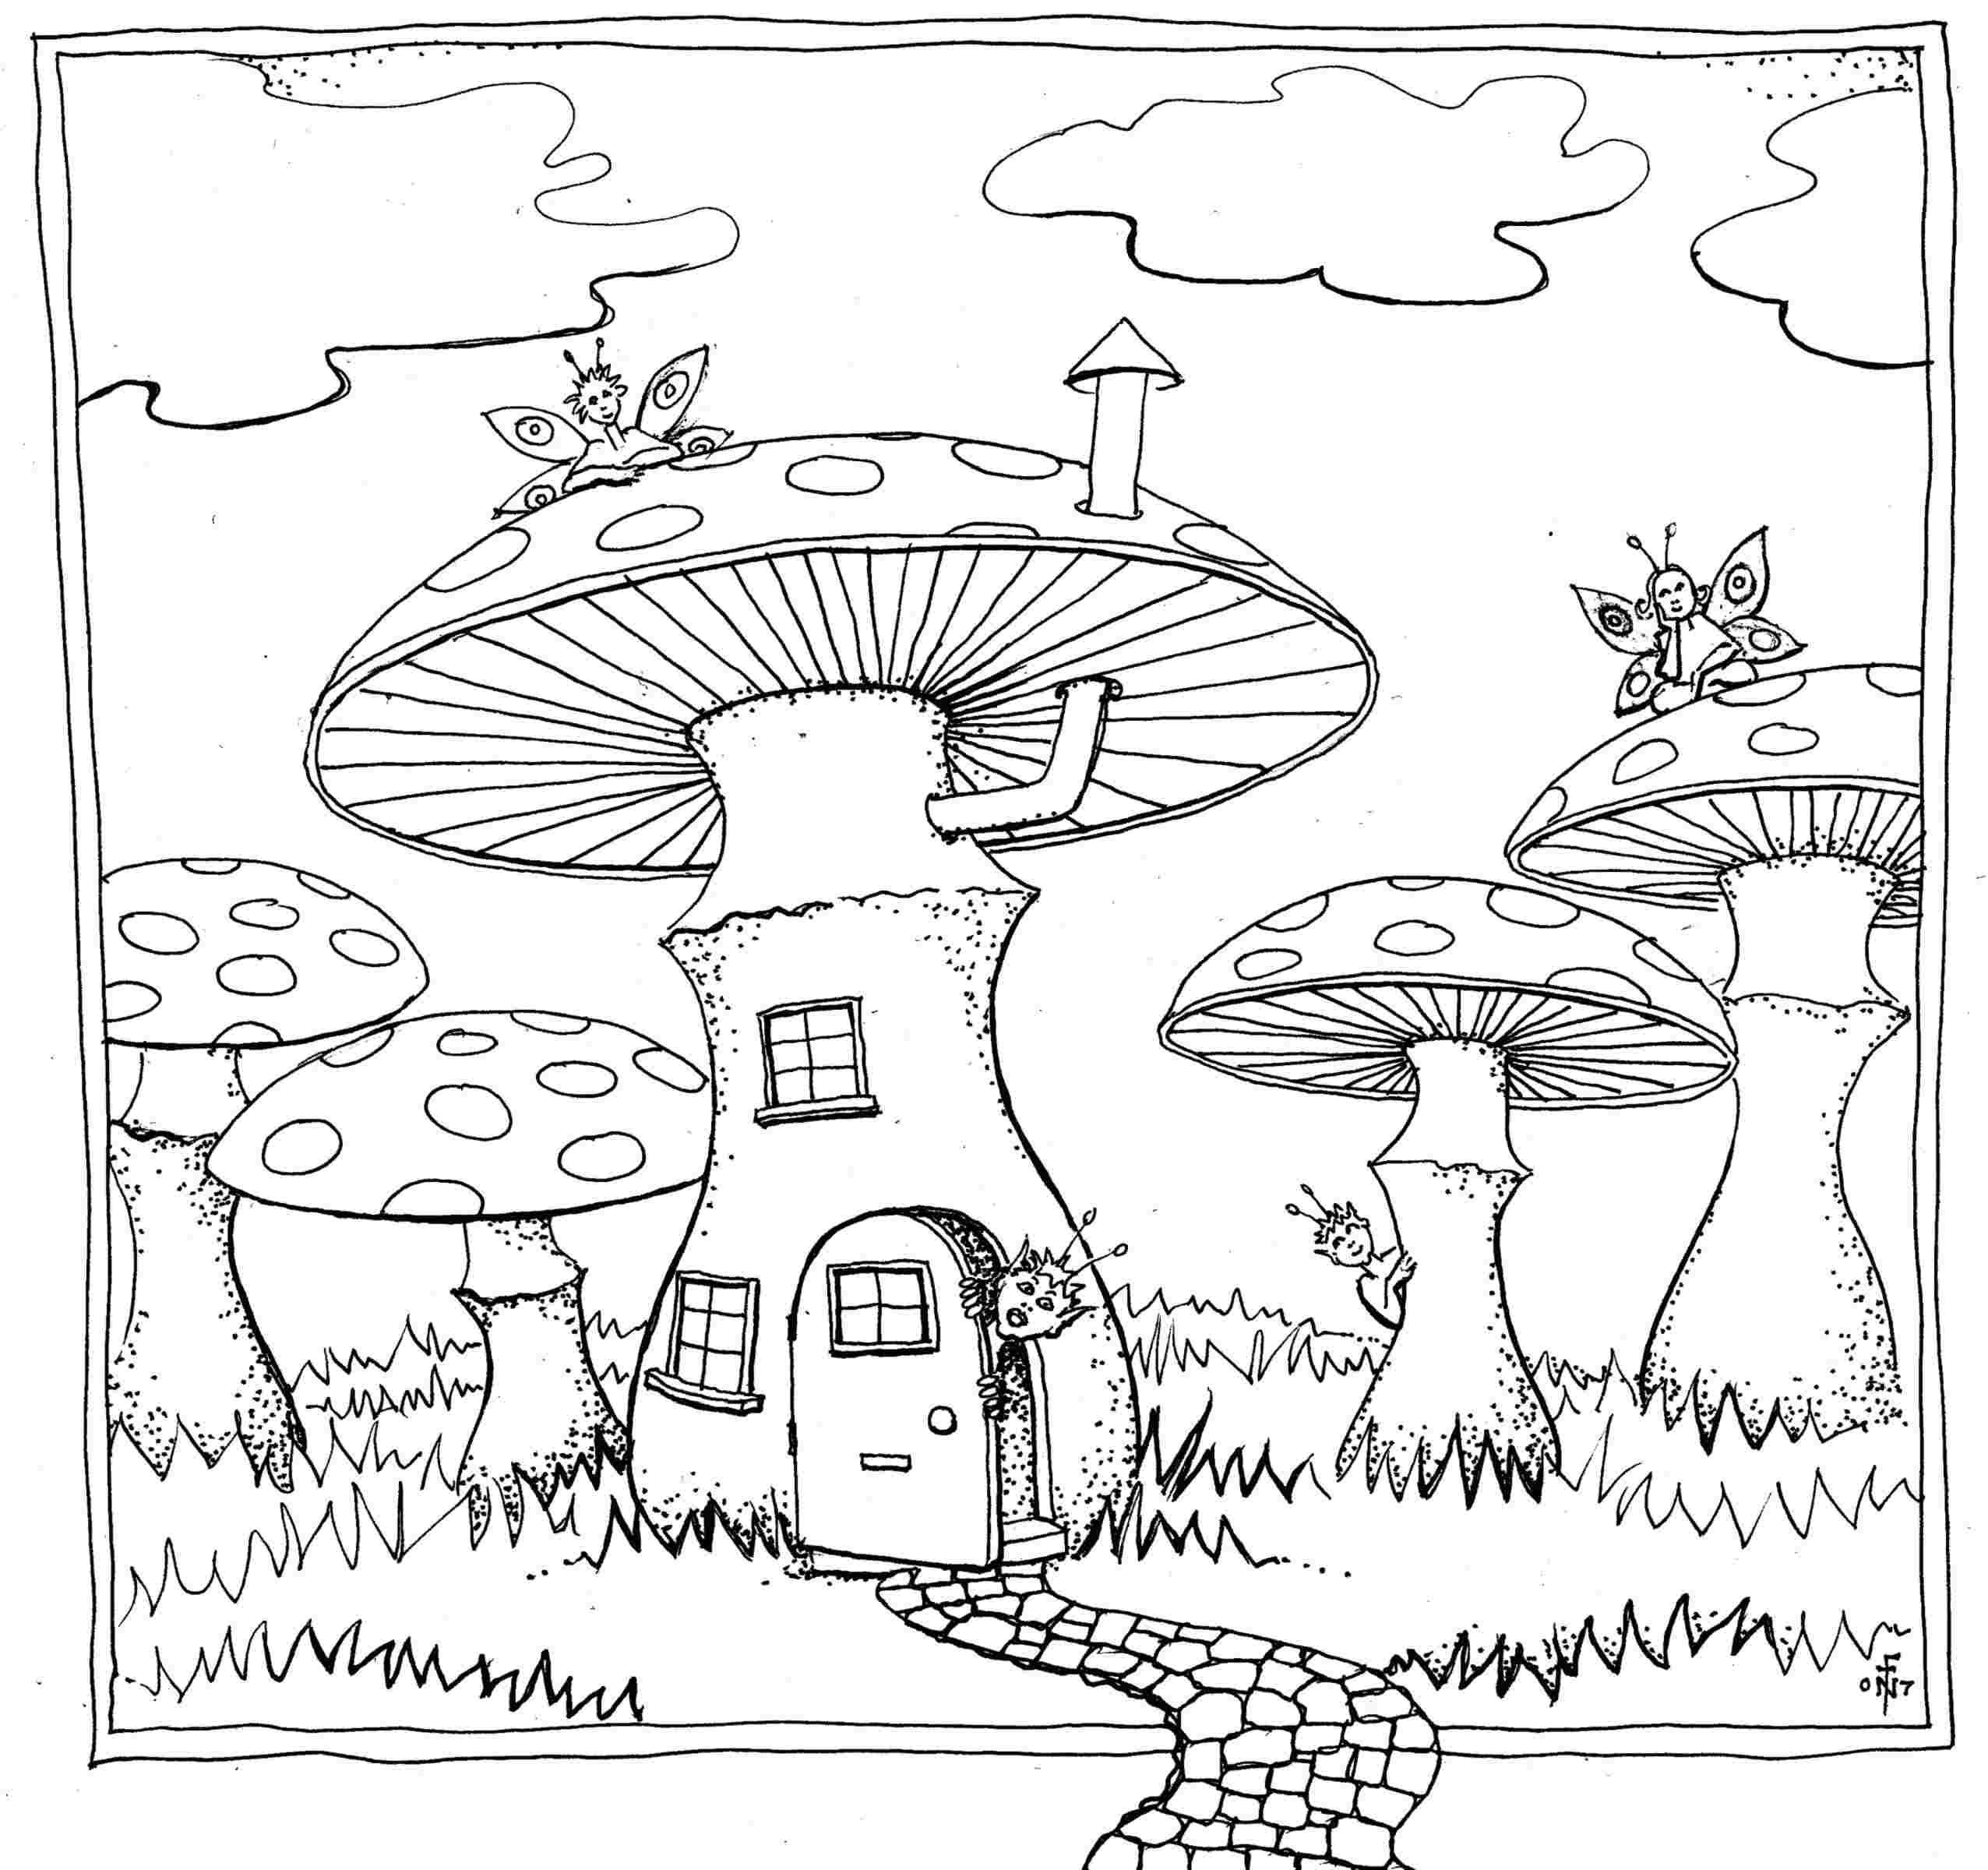 Printable Mushroom Coloring Pages For Adults Mushrooms Coloring Book